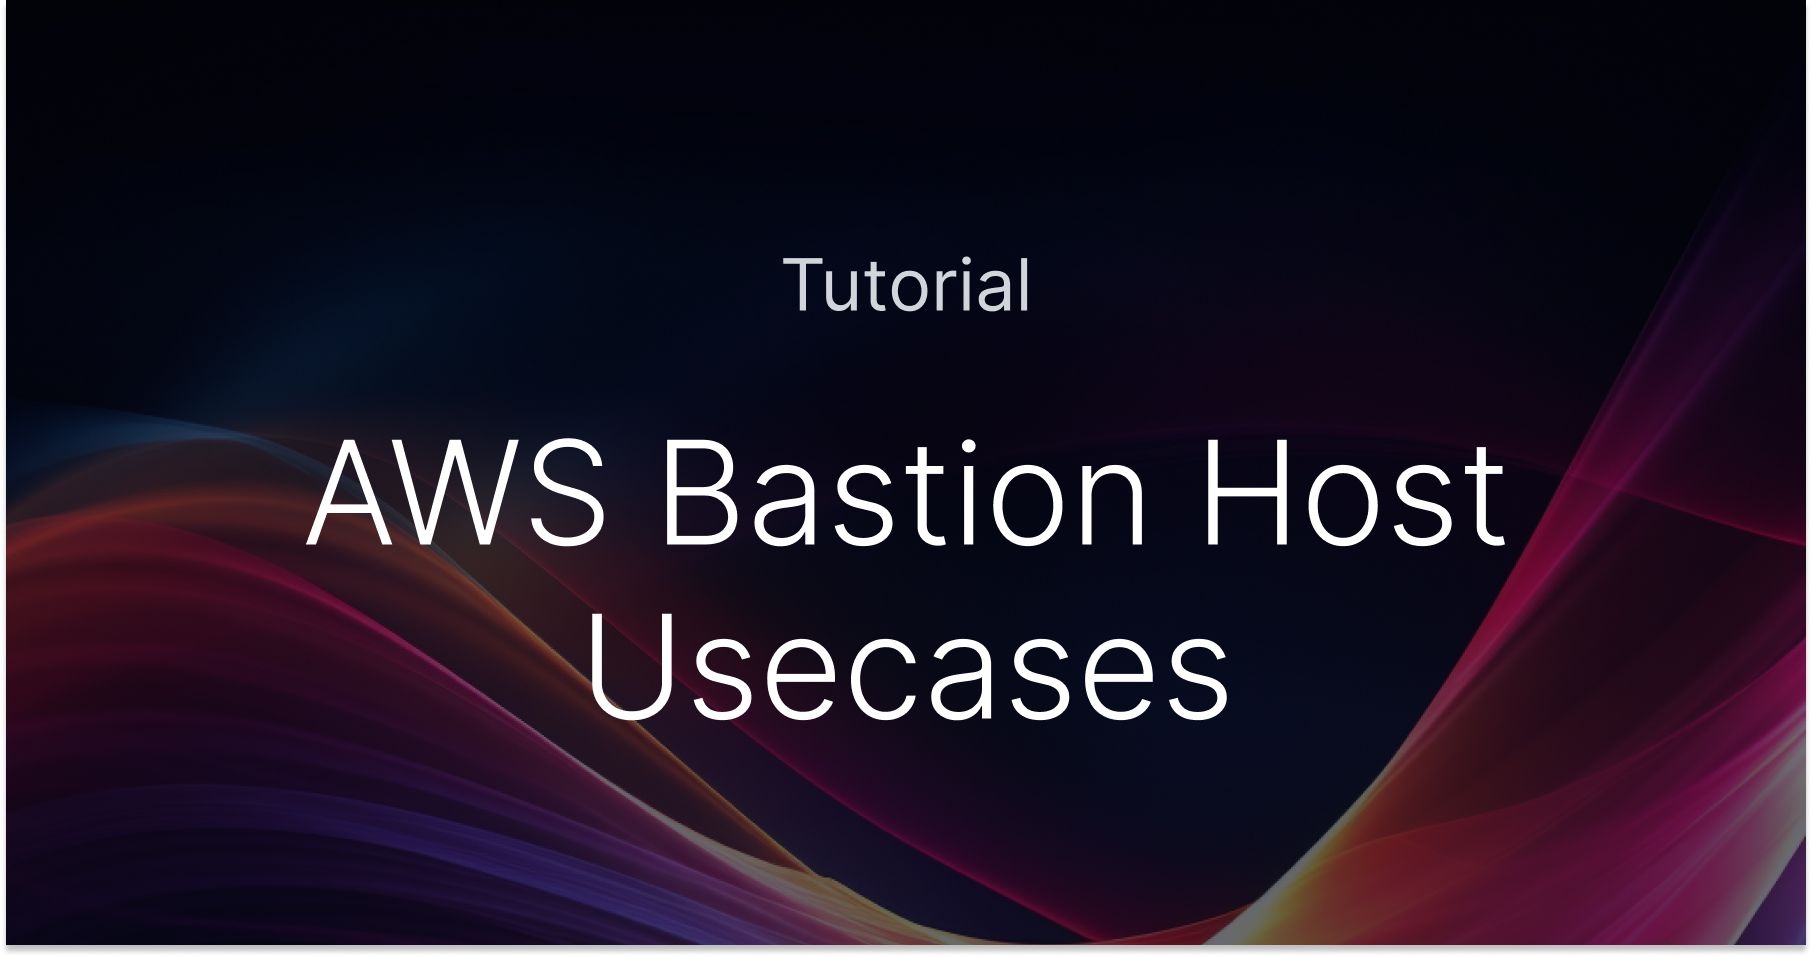 7 Alternative Use Cases for a Bastion Host